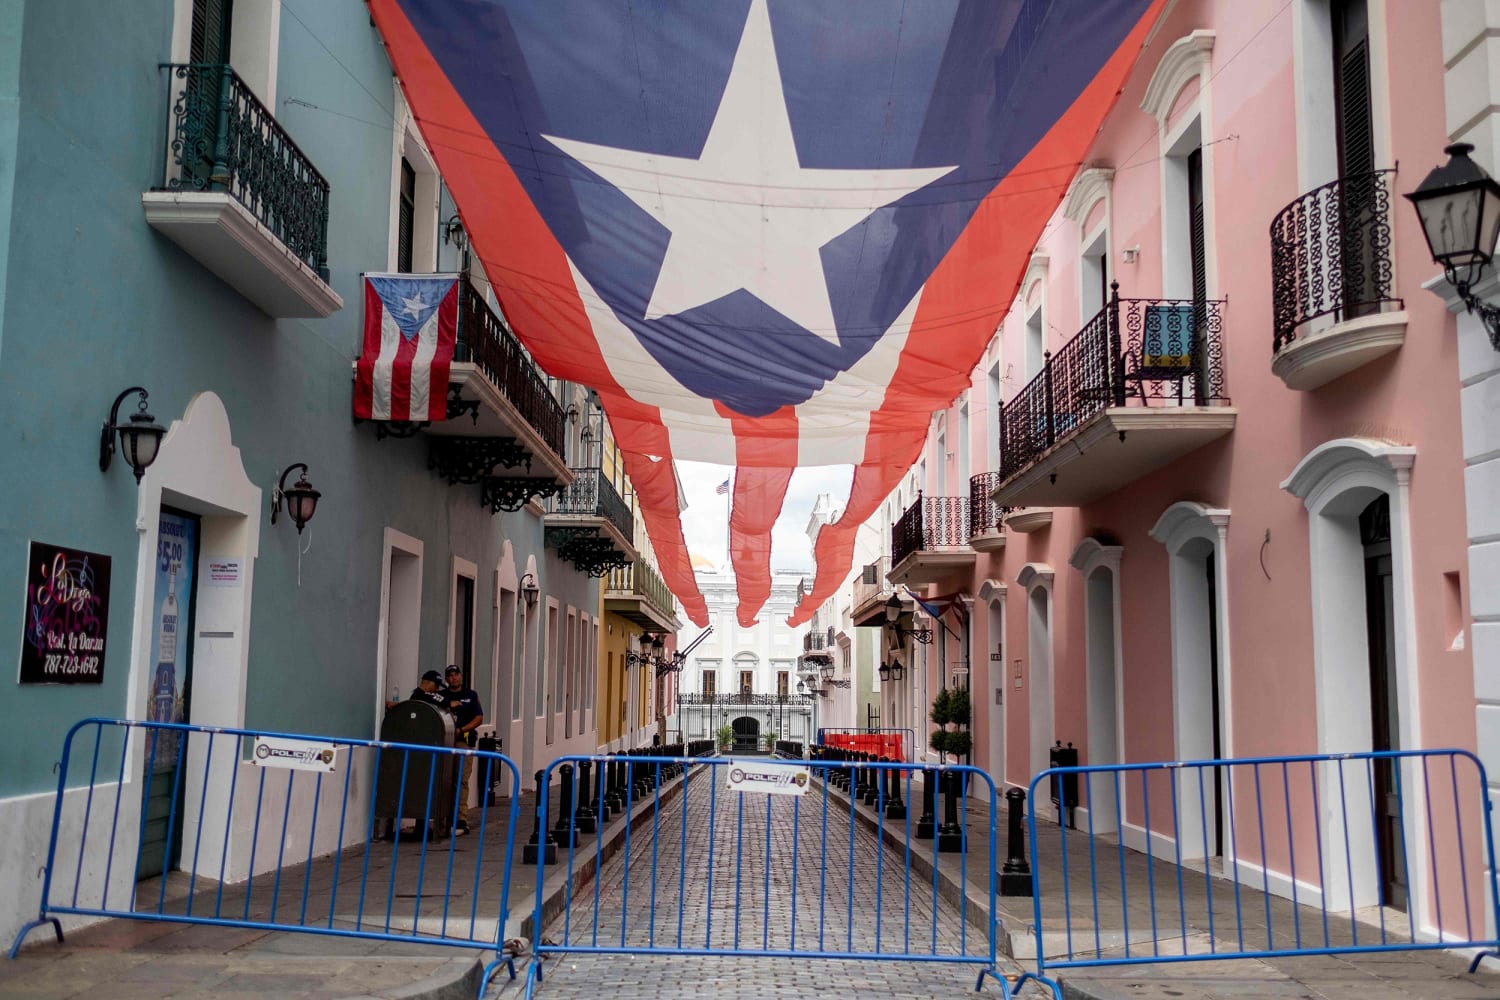 Puerto Rico Is Going To Be Ignored During Coronavirus Pandemic Experts Worry